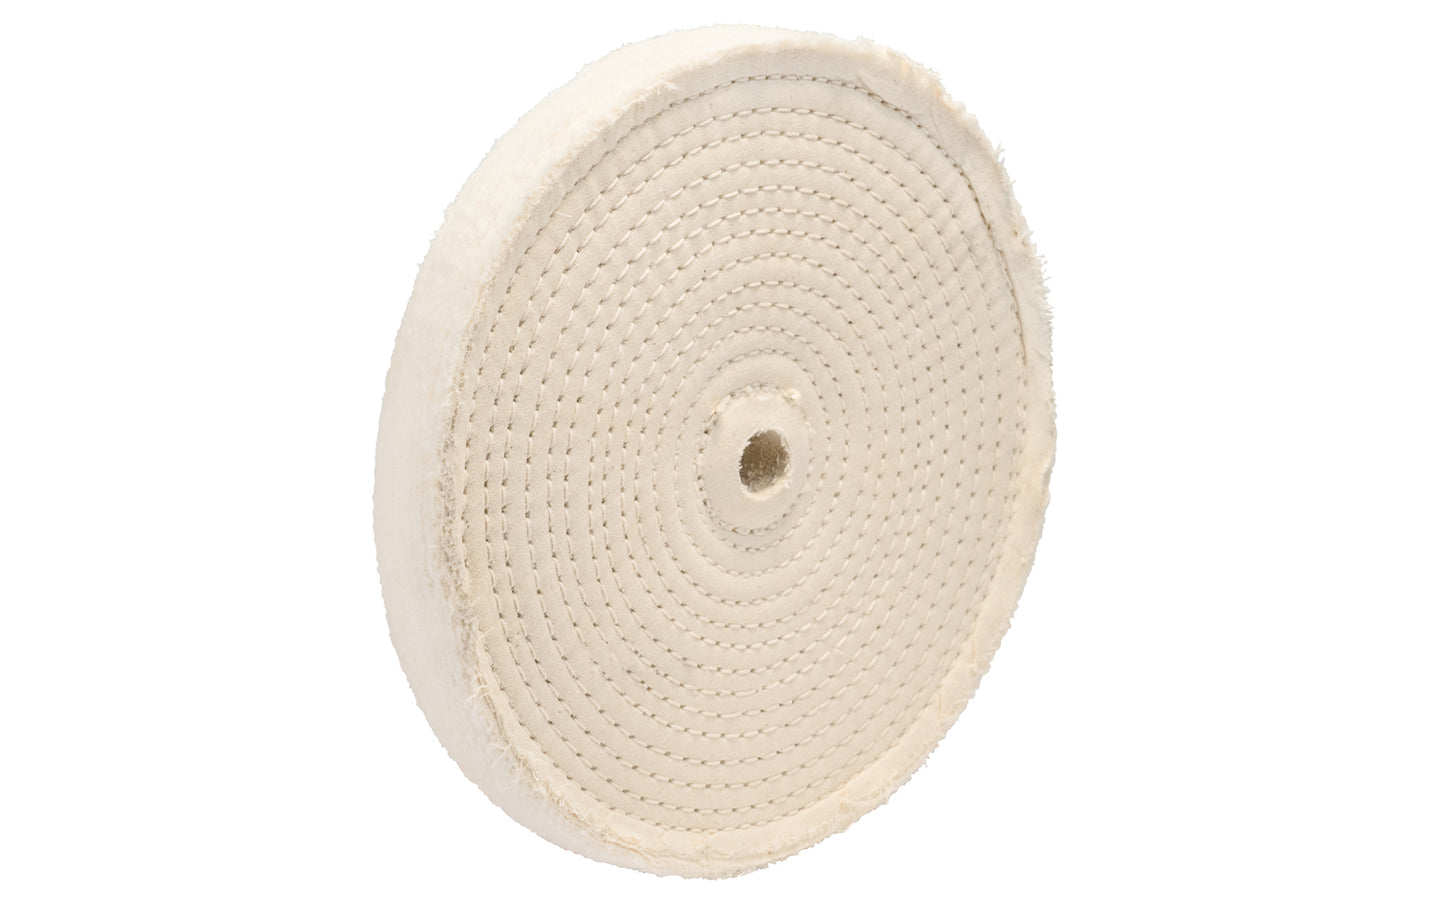 8" Spiral Sewn Buffing Wheel ~ 1" Thick is a workhorse for aggressive cutting & coarse buffing. 5/8" hole diameter. 1" wide thickness. Made in USA. spiral sewn wheel for prolong service. For coarse cutting & buffing, & flexible grinding. Stiffer cotton sheeting held together with 1/4" wide spiral sewn lockstitch sewing